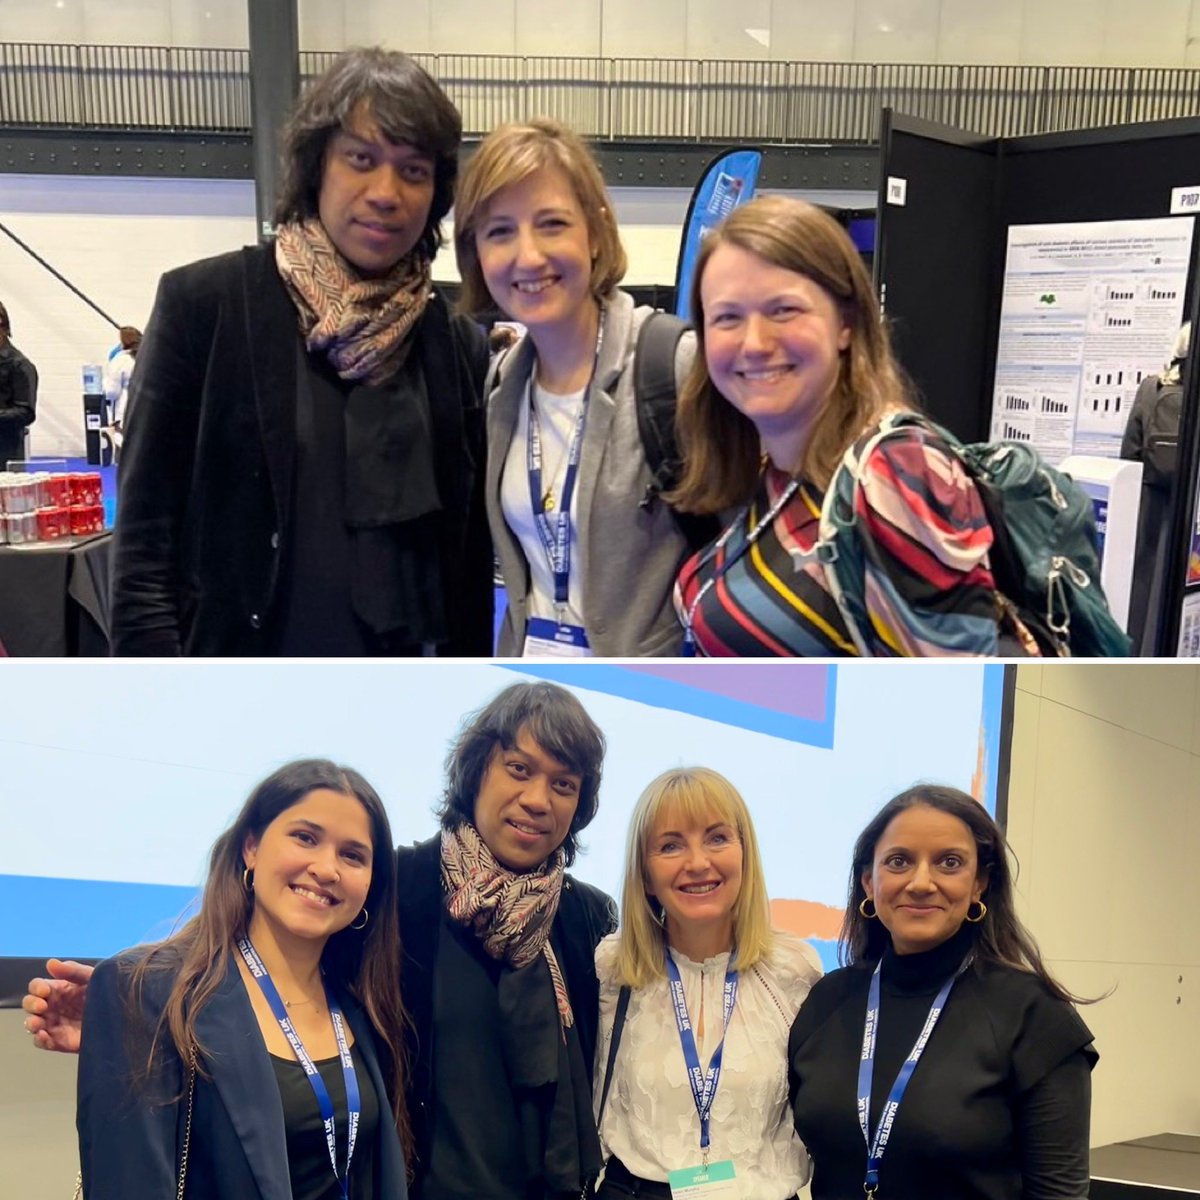 One most wonderful thing to see at #DUKPC ? The number of amazing women doing unbelievable work for those living with #Diabetes This continues to be a specialty blessed with talent, passion and desire Most fabulous 🥰 #gbdoc 💙